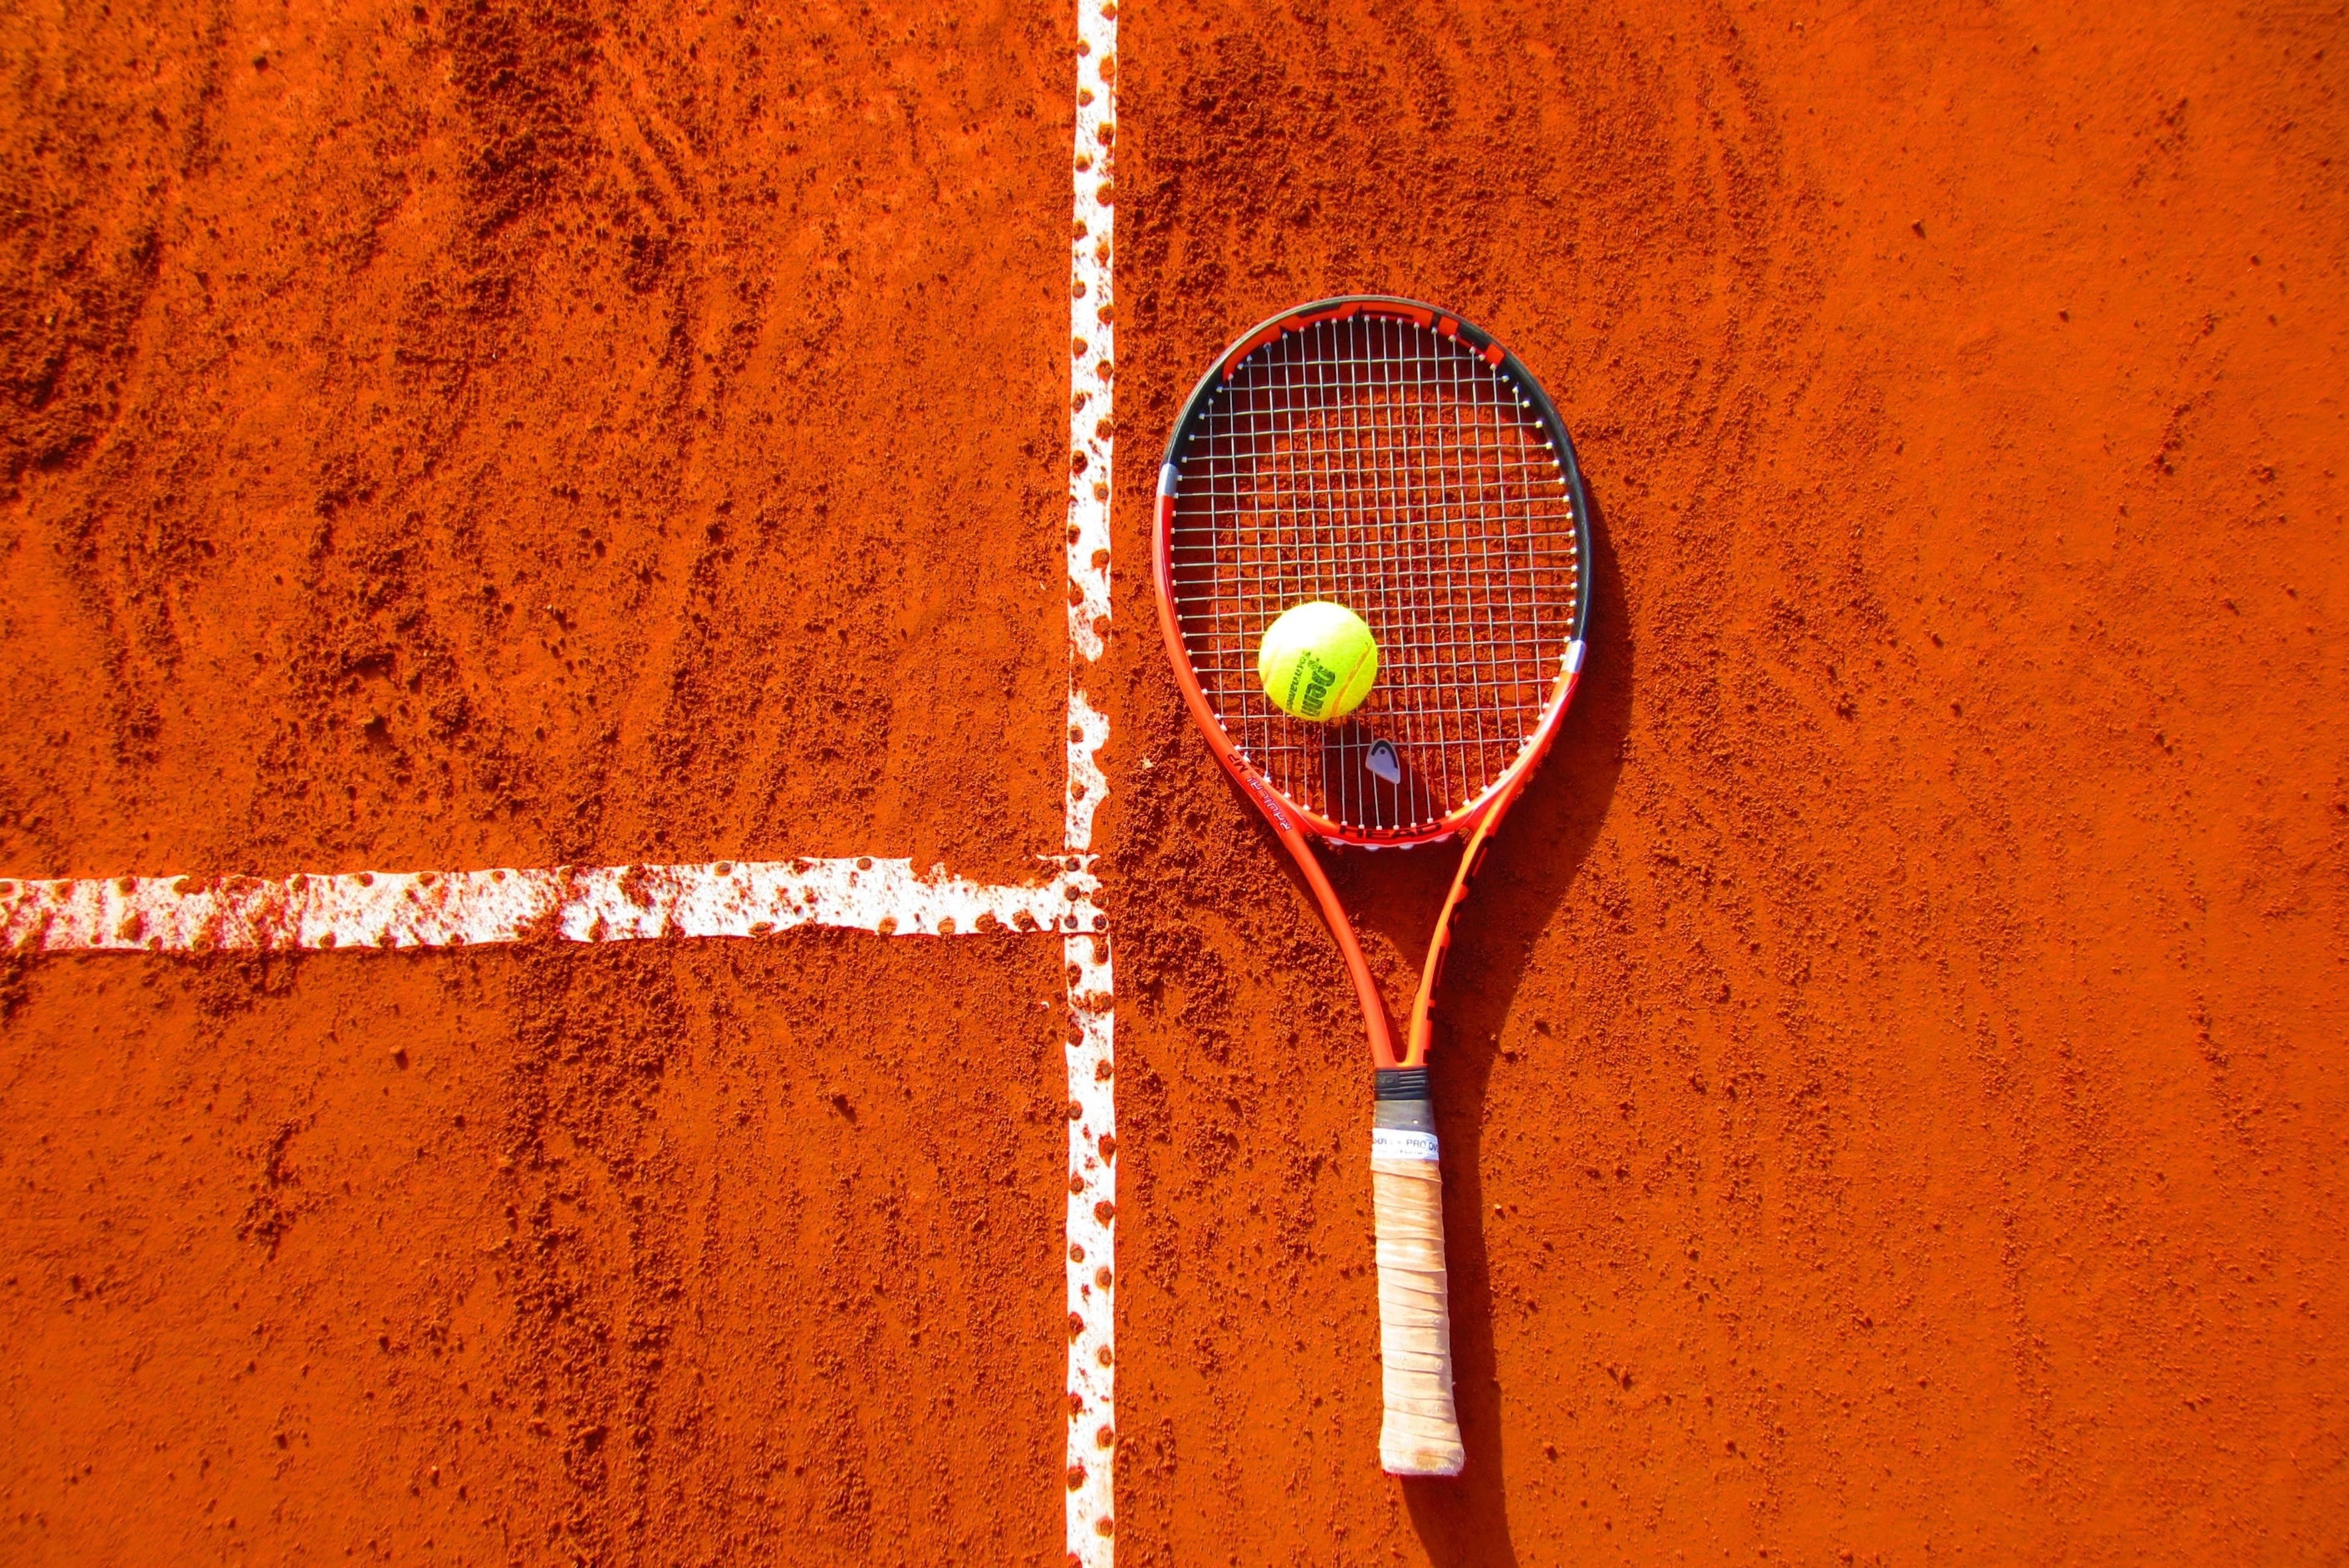 A tennis racket and tennis ball on an orange-red background